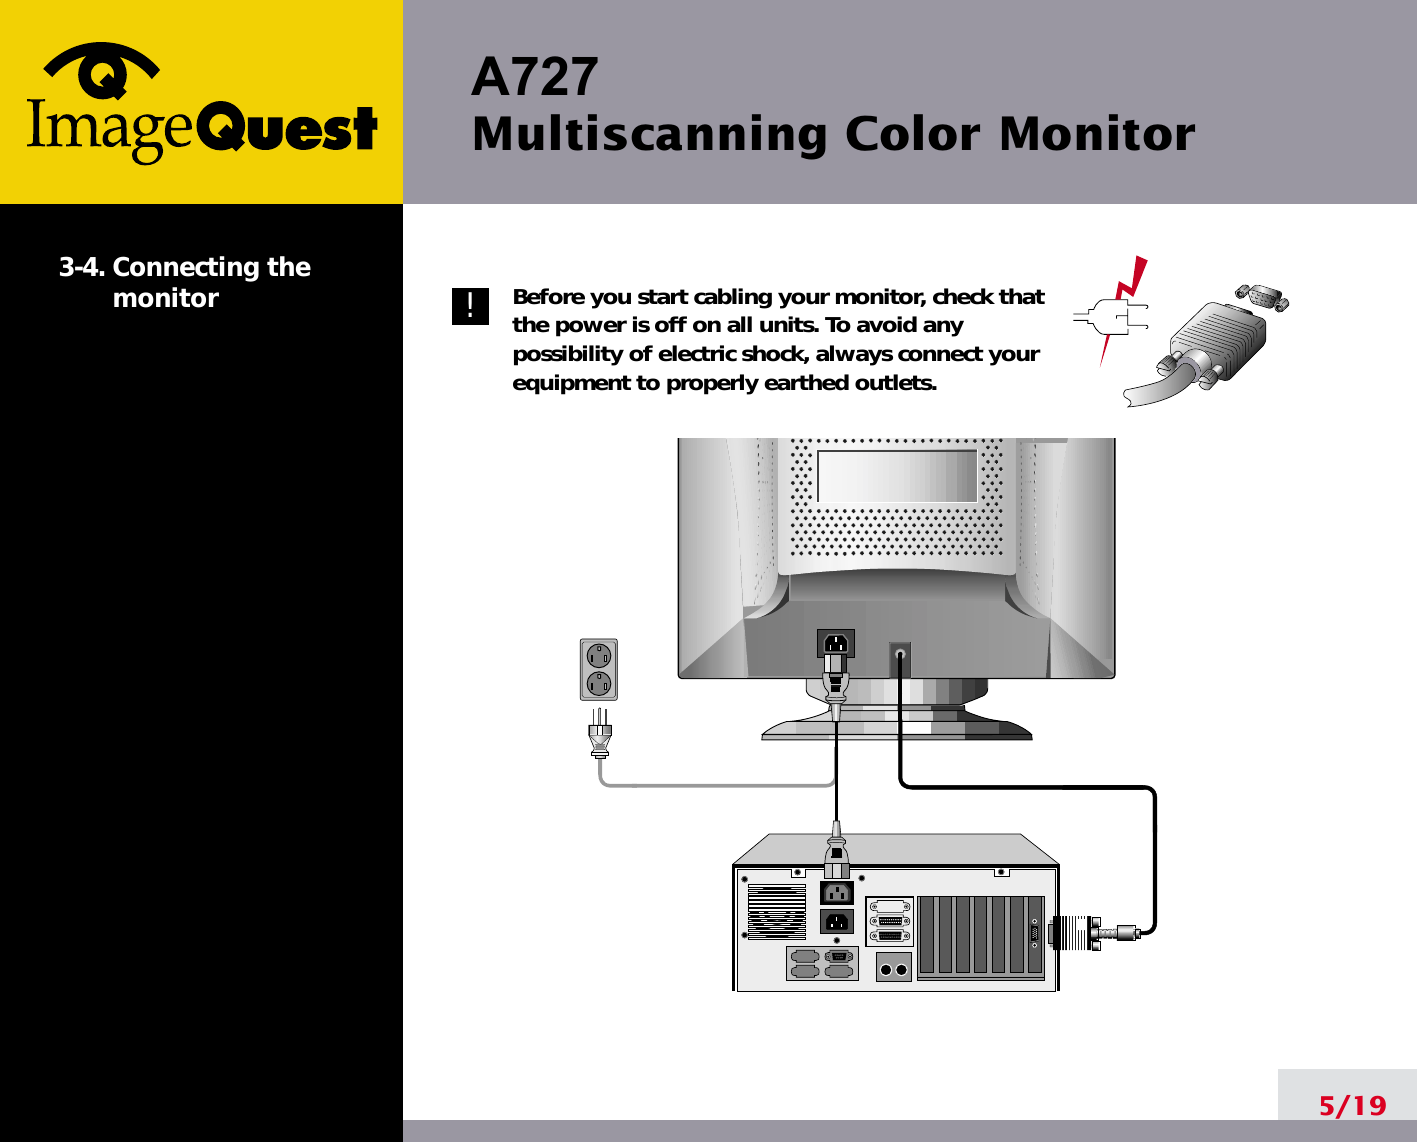 A727 Multiscanning Color Monitor5/193-4. Connecting themonitor Before you start cabling your monitor, check thatthe power is off on all units. To avoid anypossibility of electric shock, always connect yourequipment to properly earthed outlets.!